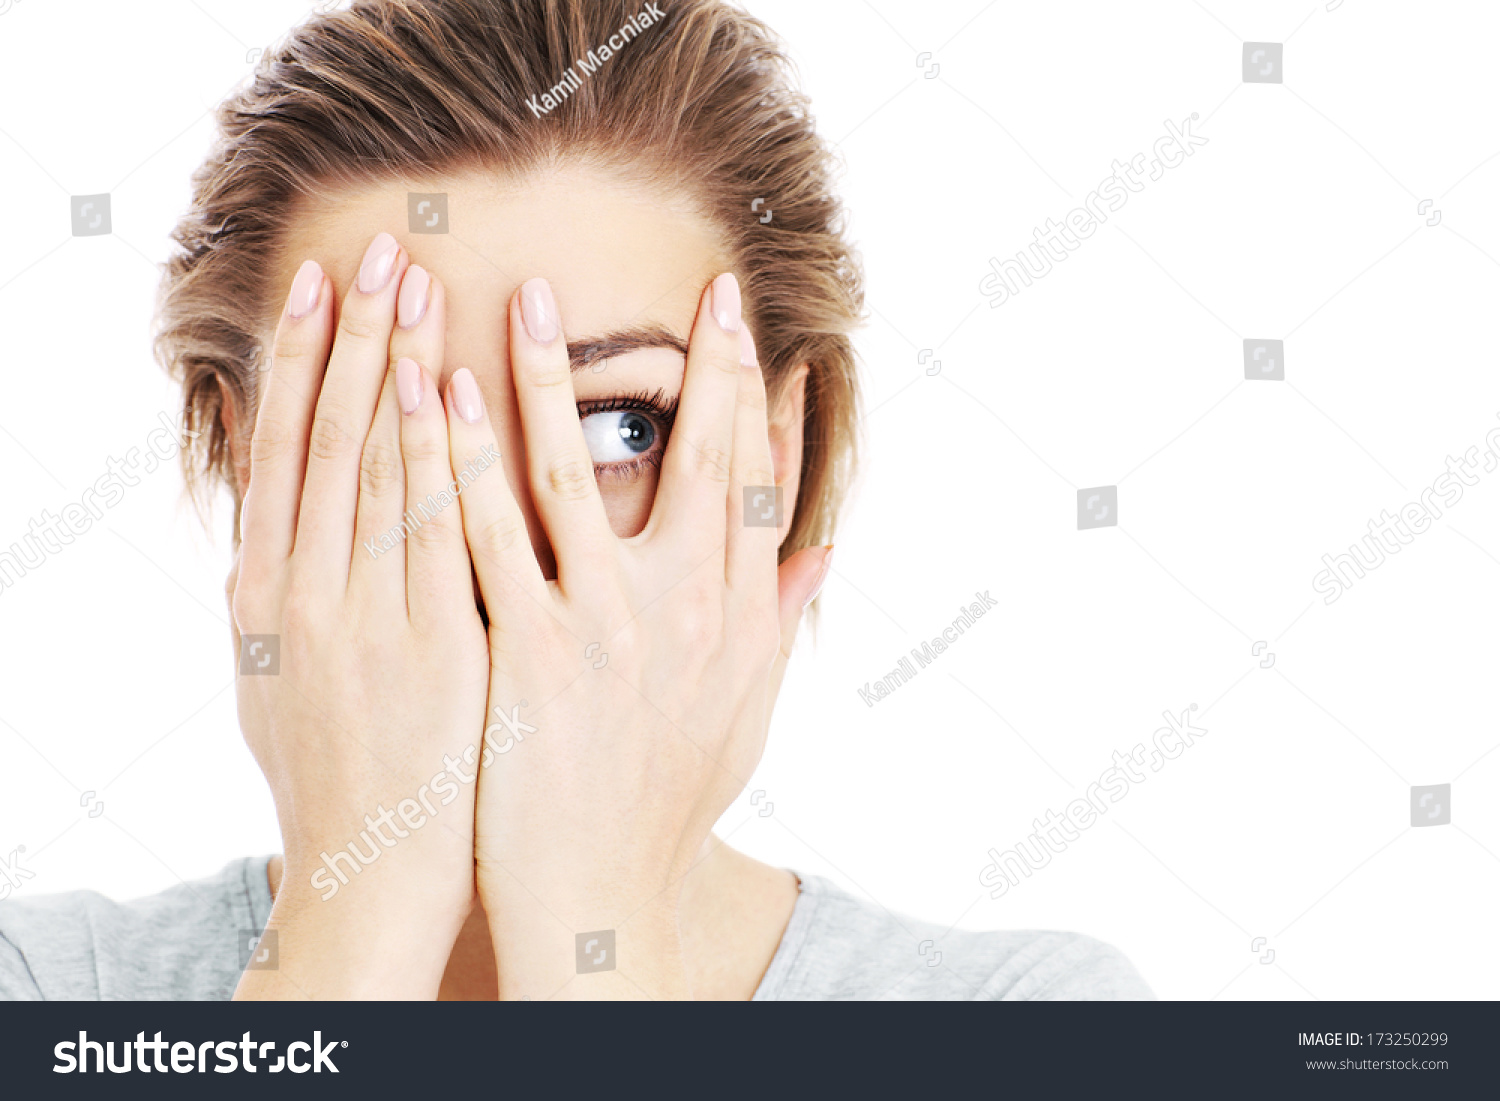 A picture of a scared woman covering her eyes over white background #173250299